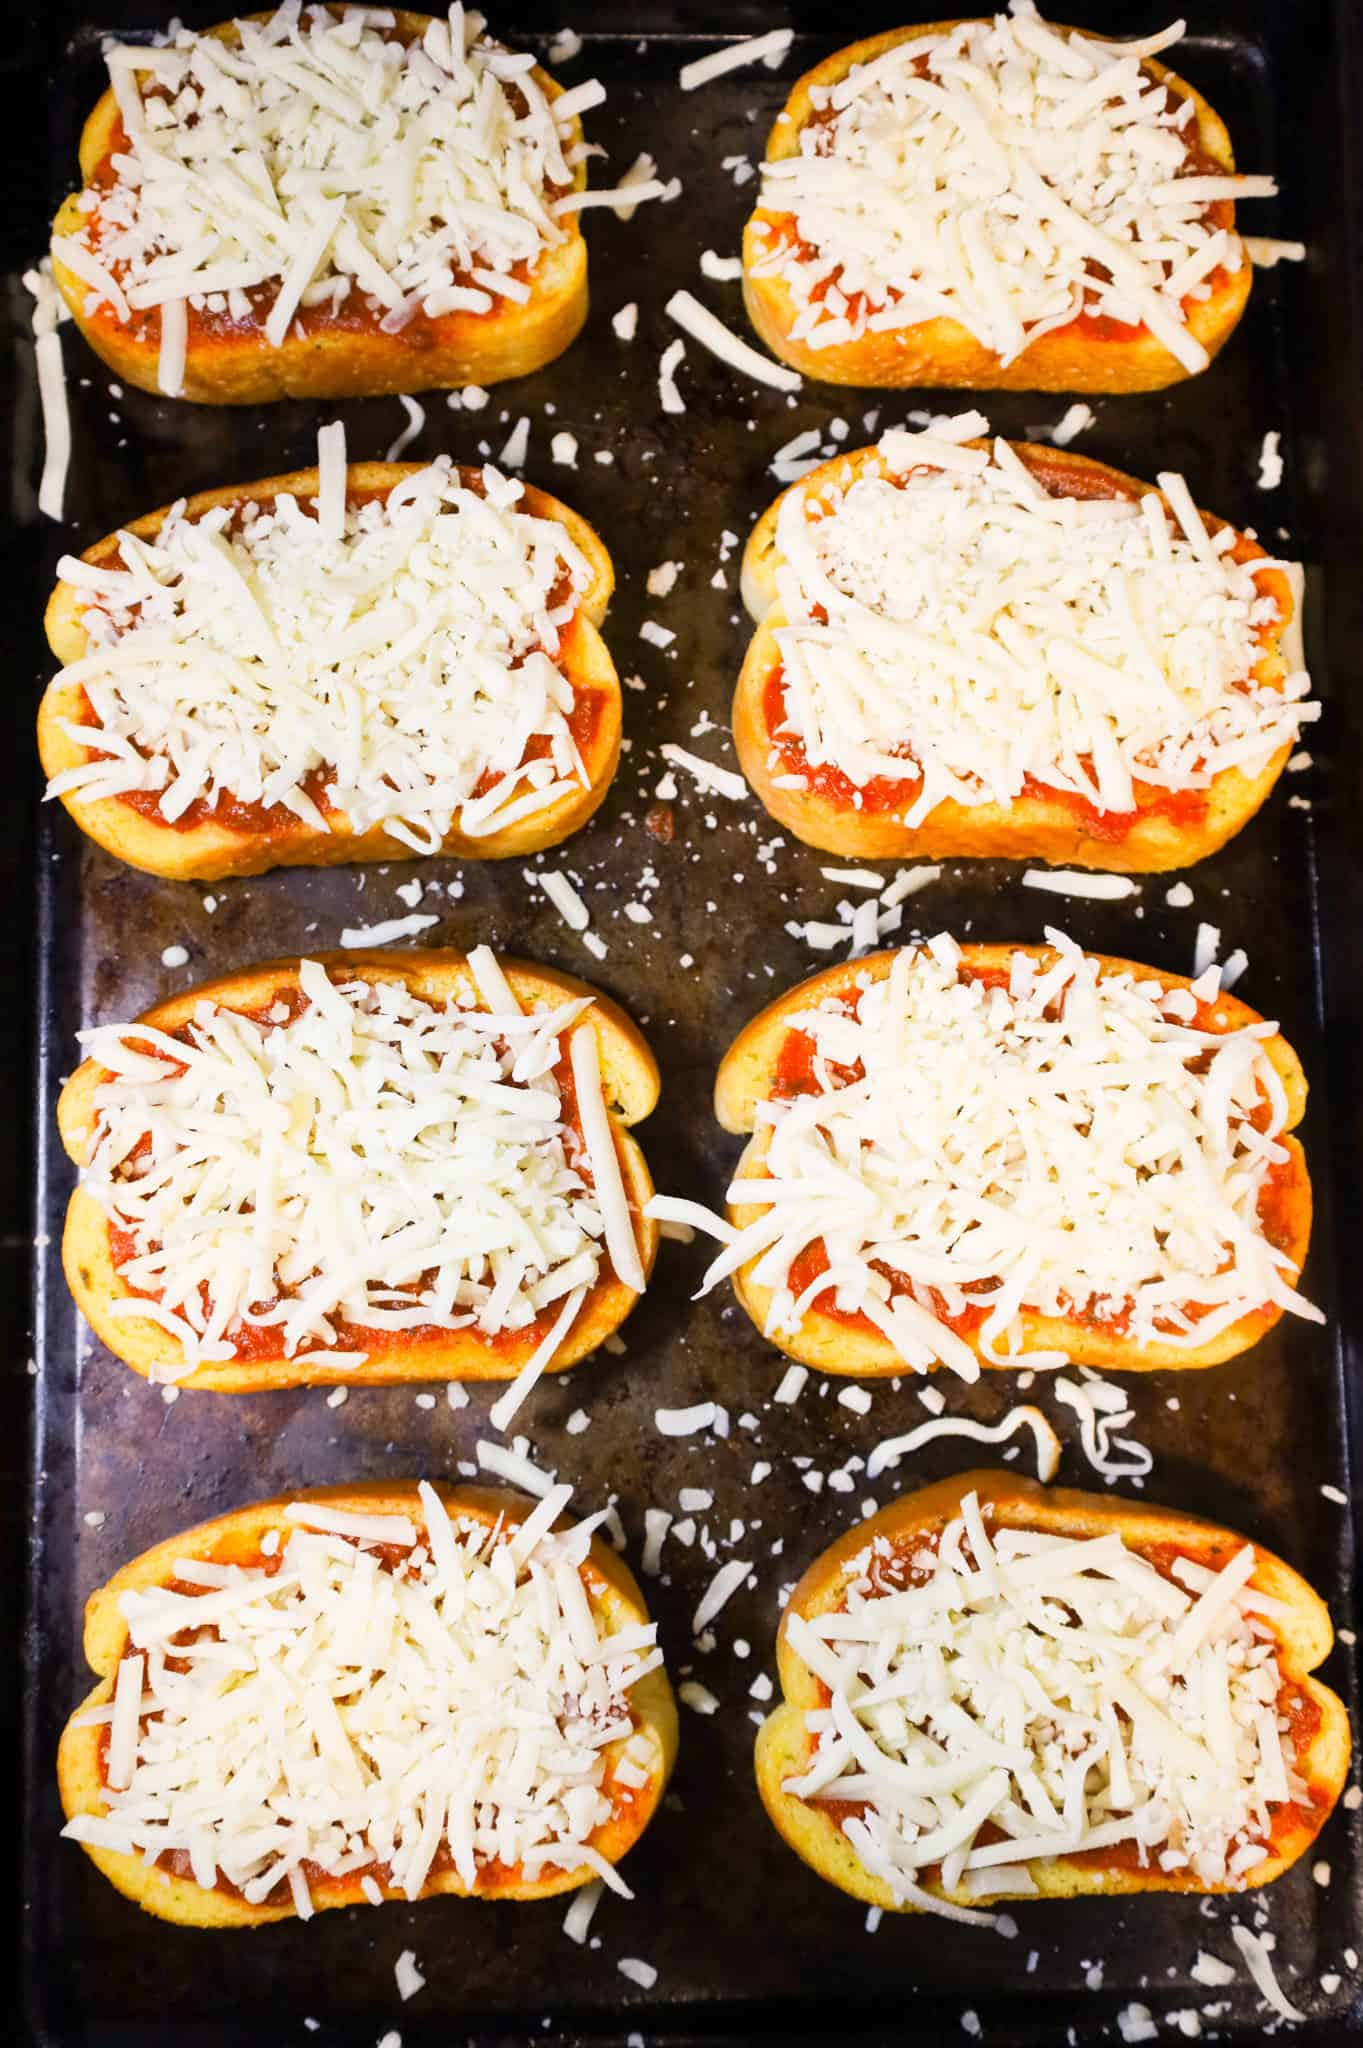 shredded mozzarella cheese and pizza sauce on top of slices of garlic texas toast on a baking sheet